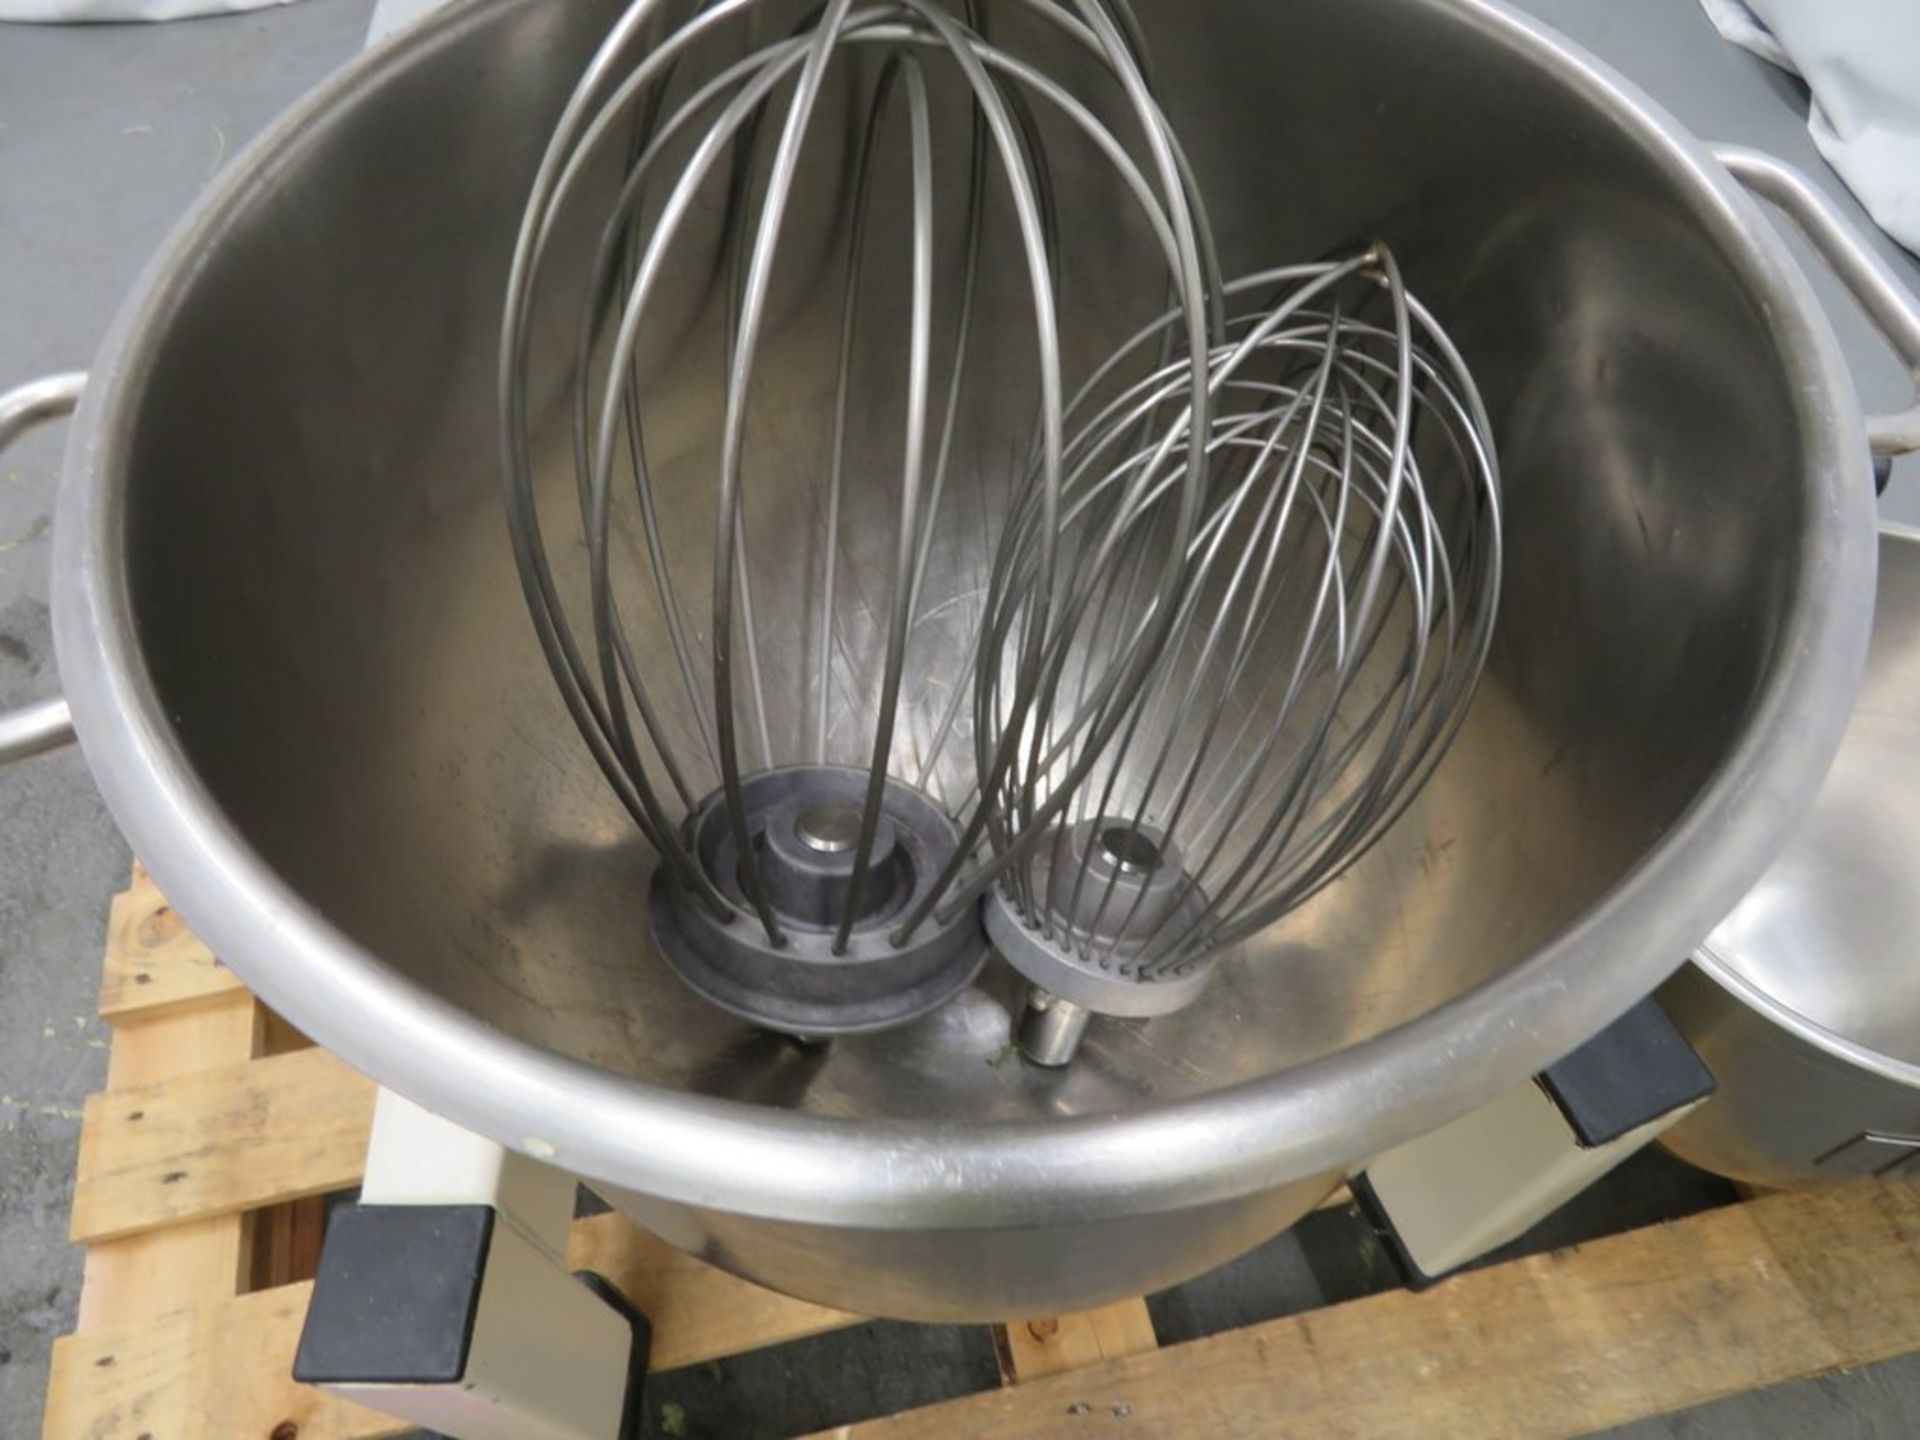 Electrolux Dito MB40S mixer, 40 litre bowl, with whisk attachments, 3 phase electric - Image 5 of 14